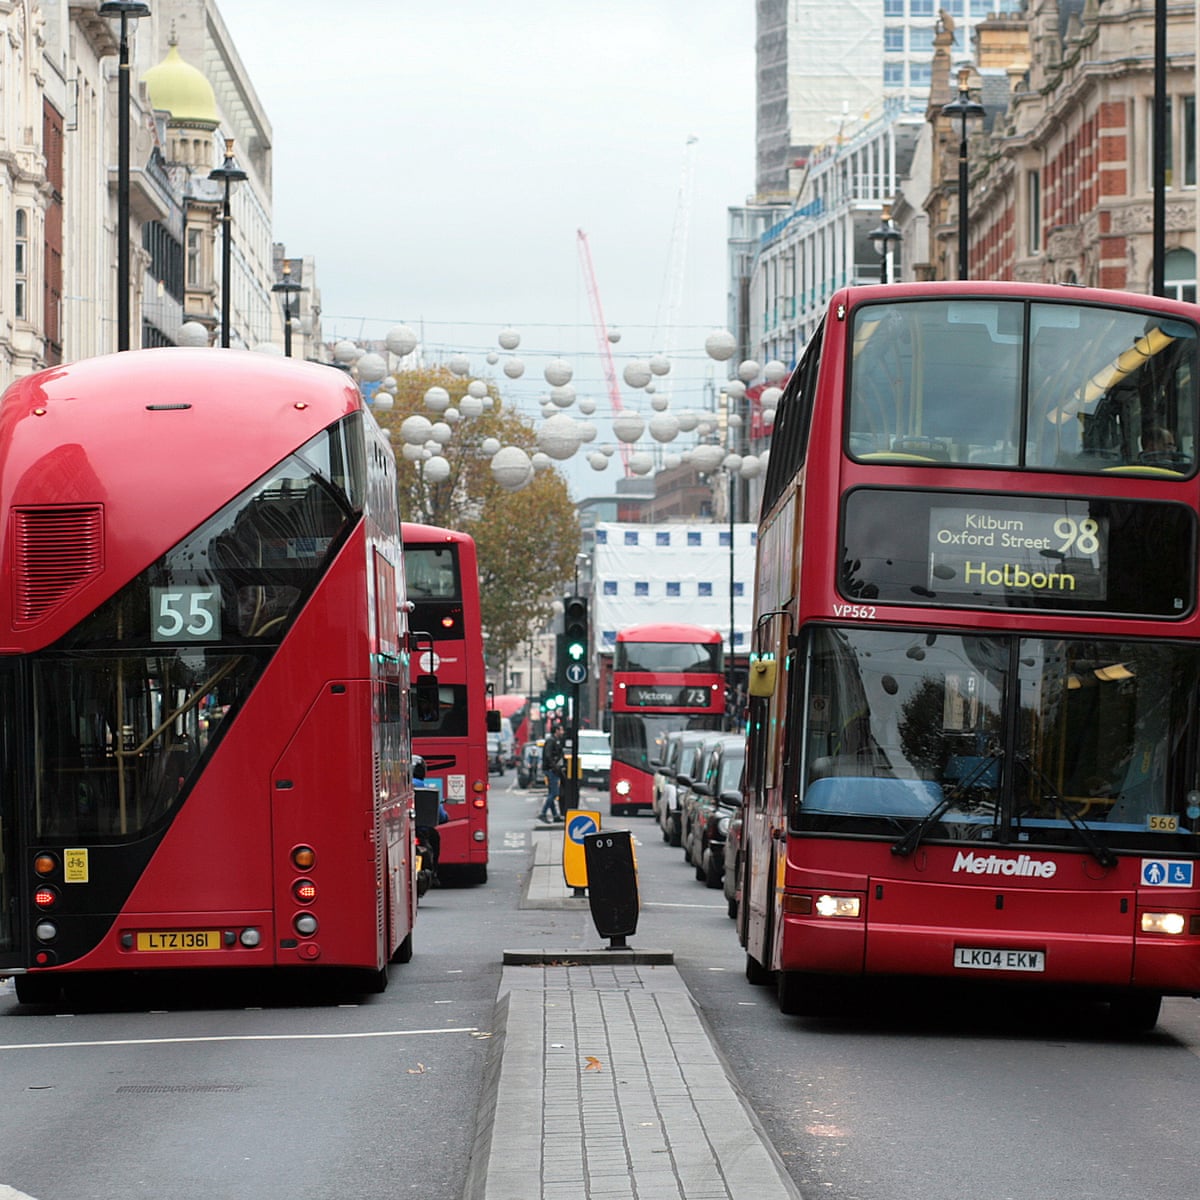 Futuristic sounds to make electric buses safer hit wrong note